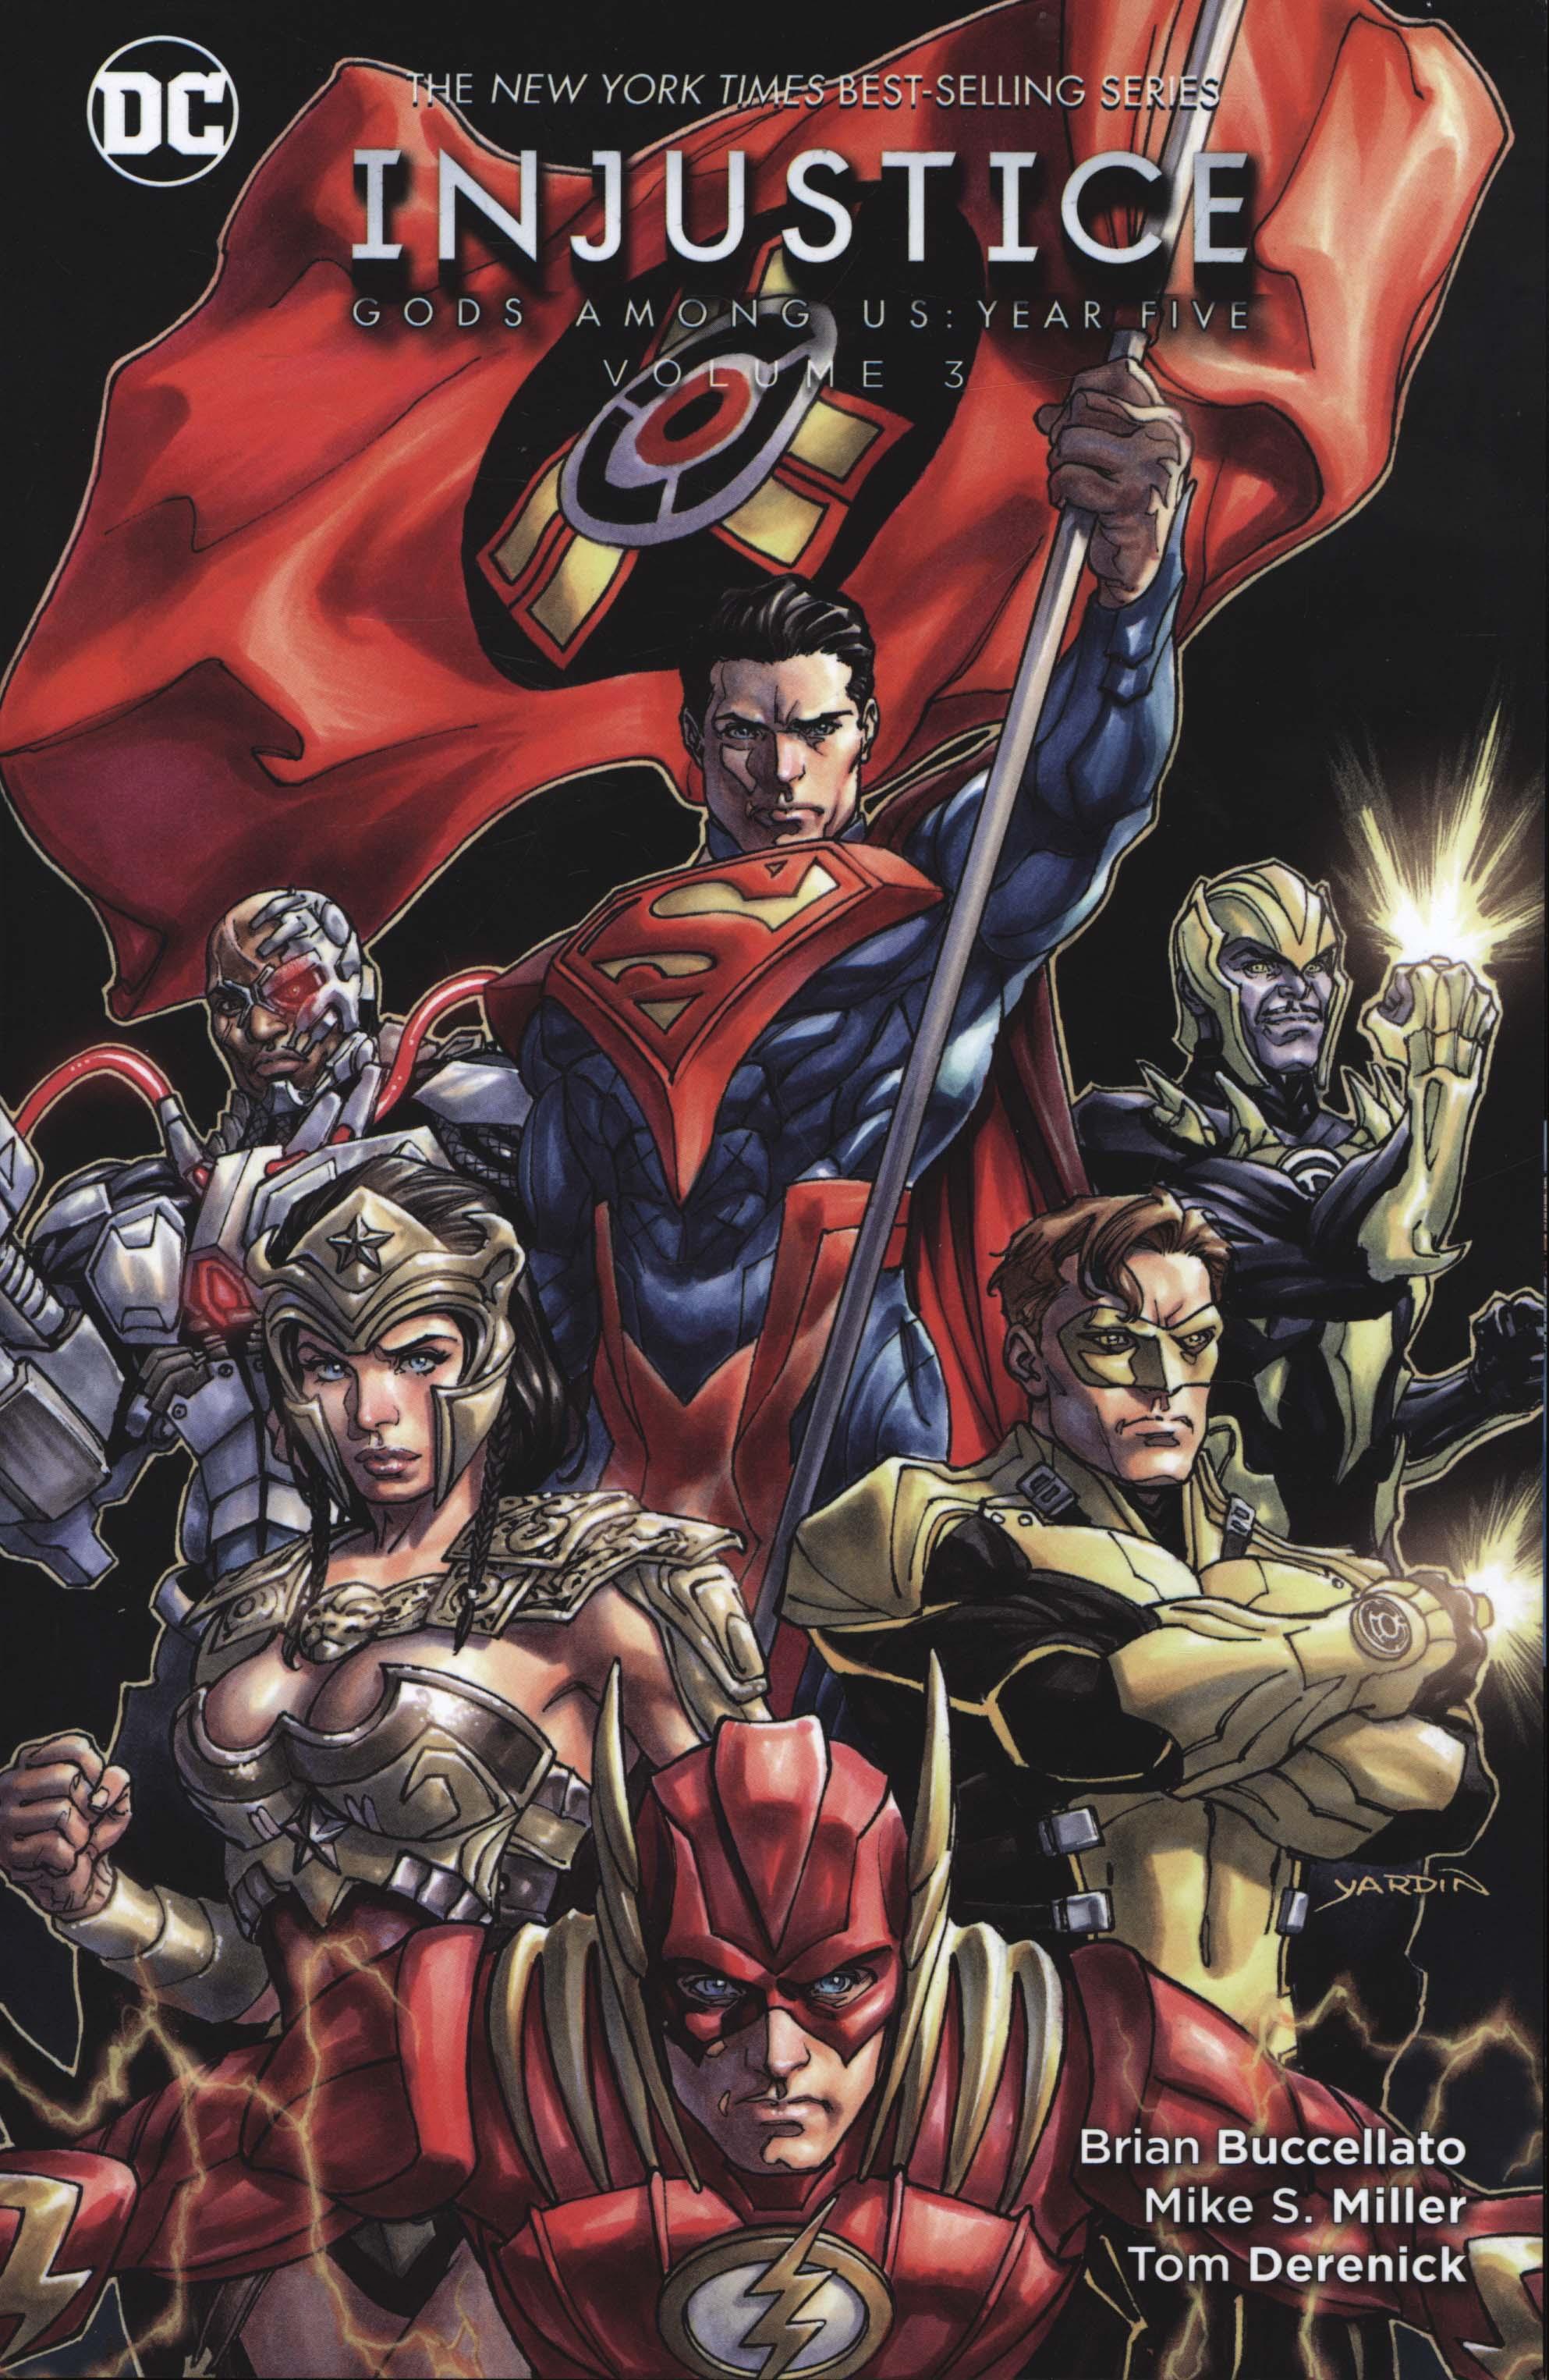 Injustice Gods Among Us Year Five Vol. 3 - Brian Buccellato